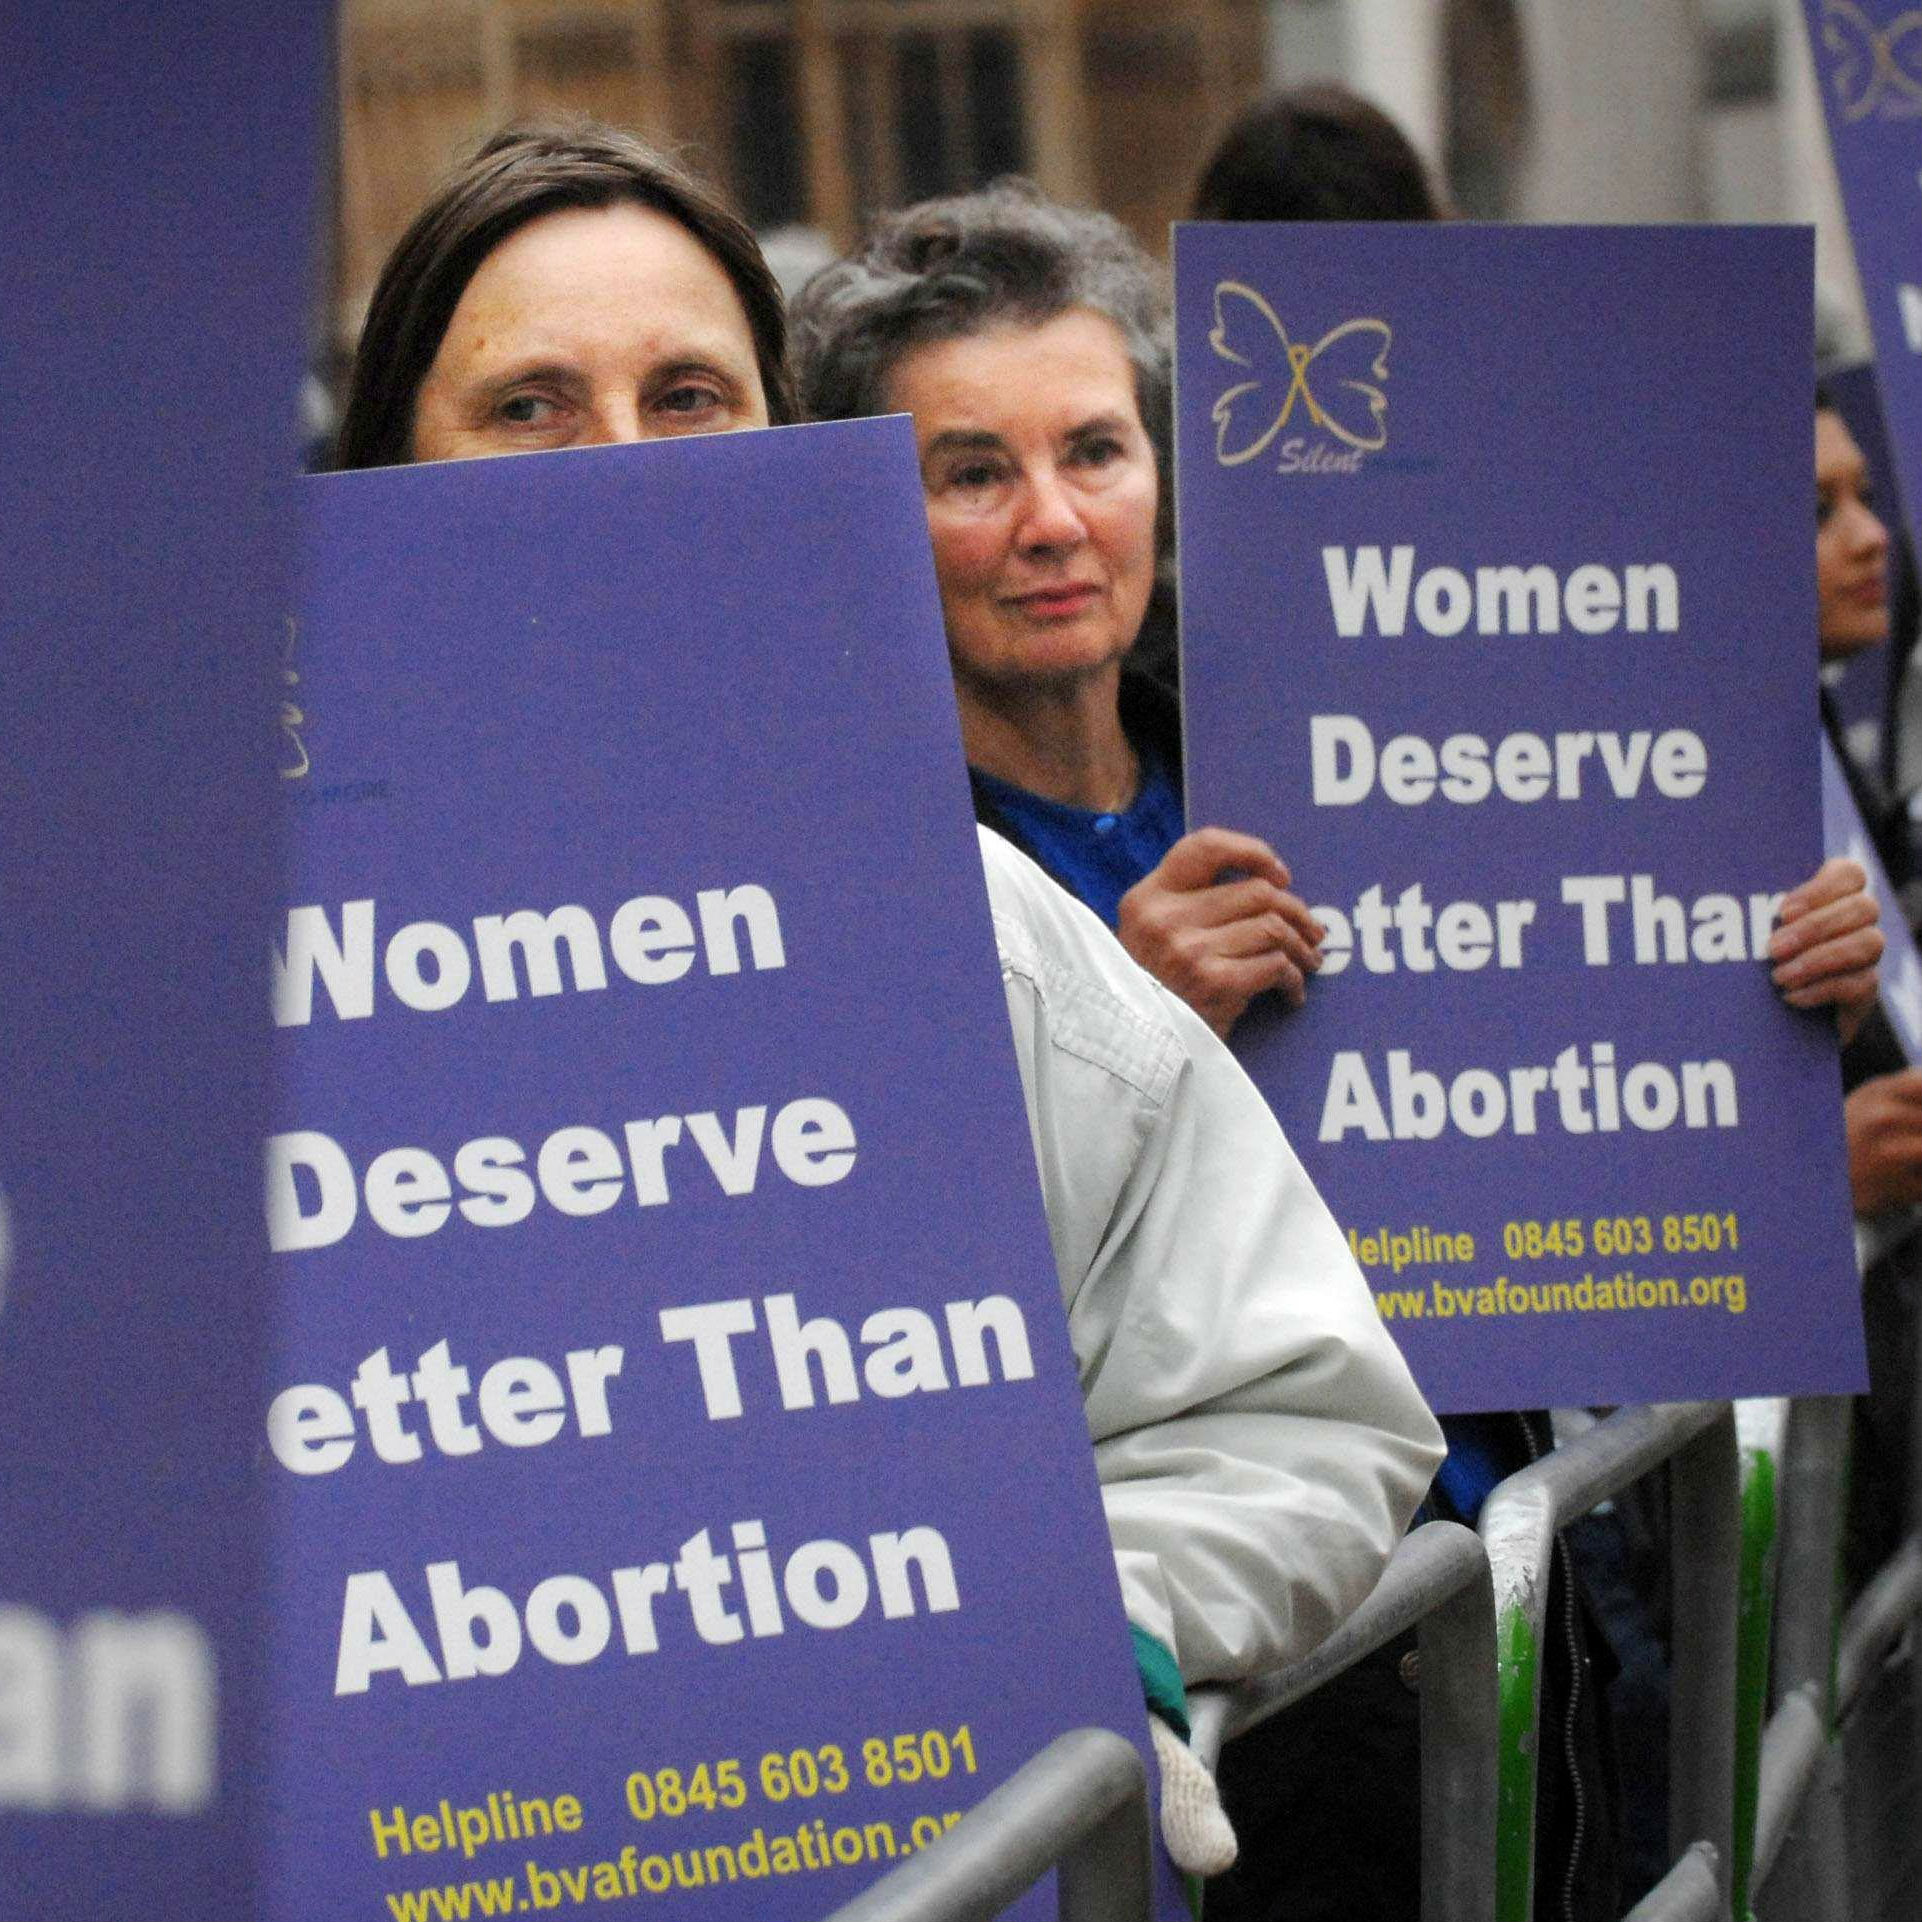 Pro-life supporters banned from protesting within clinic ‘buffer zone’